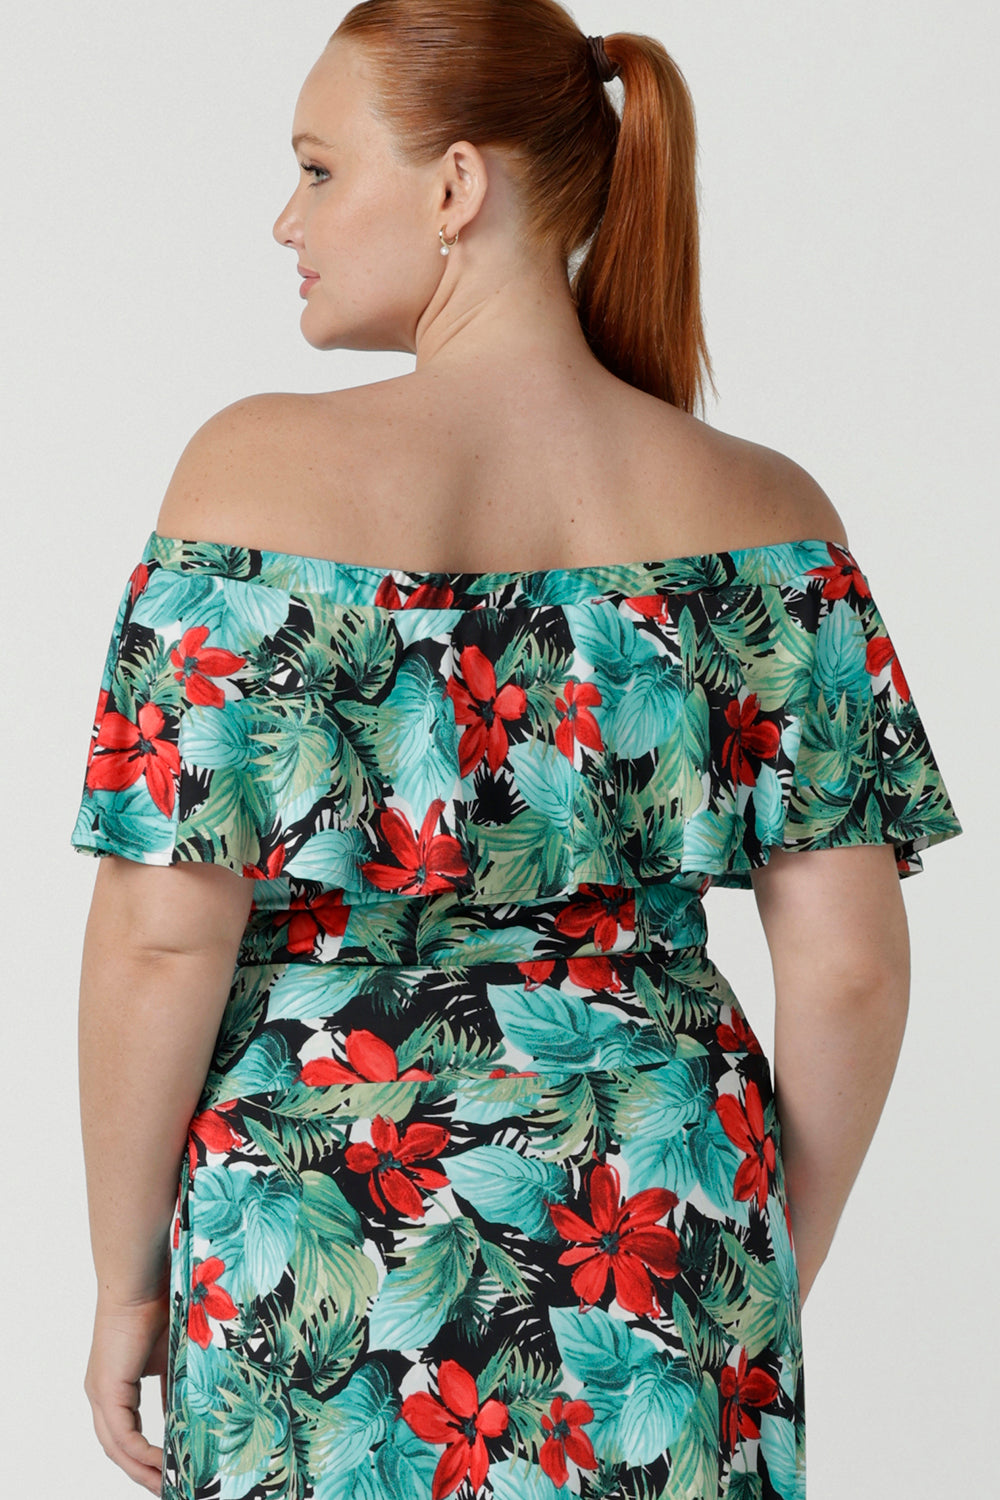 Back view of off shoulder Briar Top in Havana on a size 12 model. Tropical print design with red flowers and green palm leaf. Soft slinky jersey. Wear this top multiple ways one shoulder, off shoulder and on shoulder. Made in Australia for women size 8 - 24.